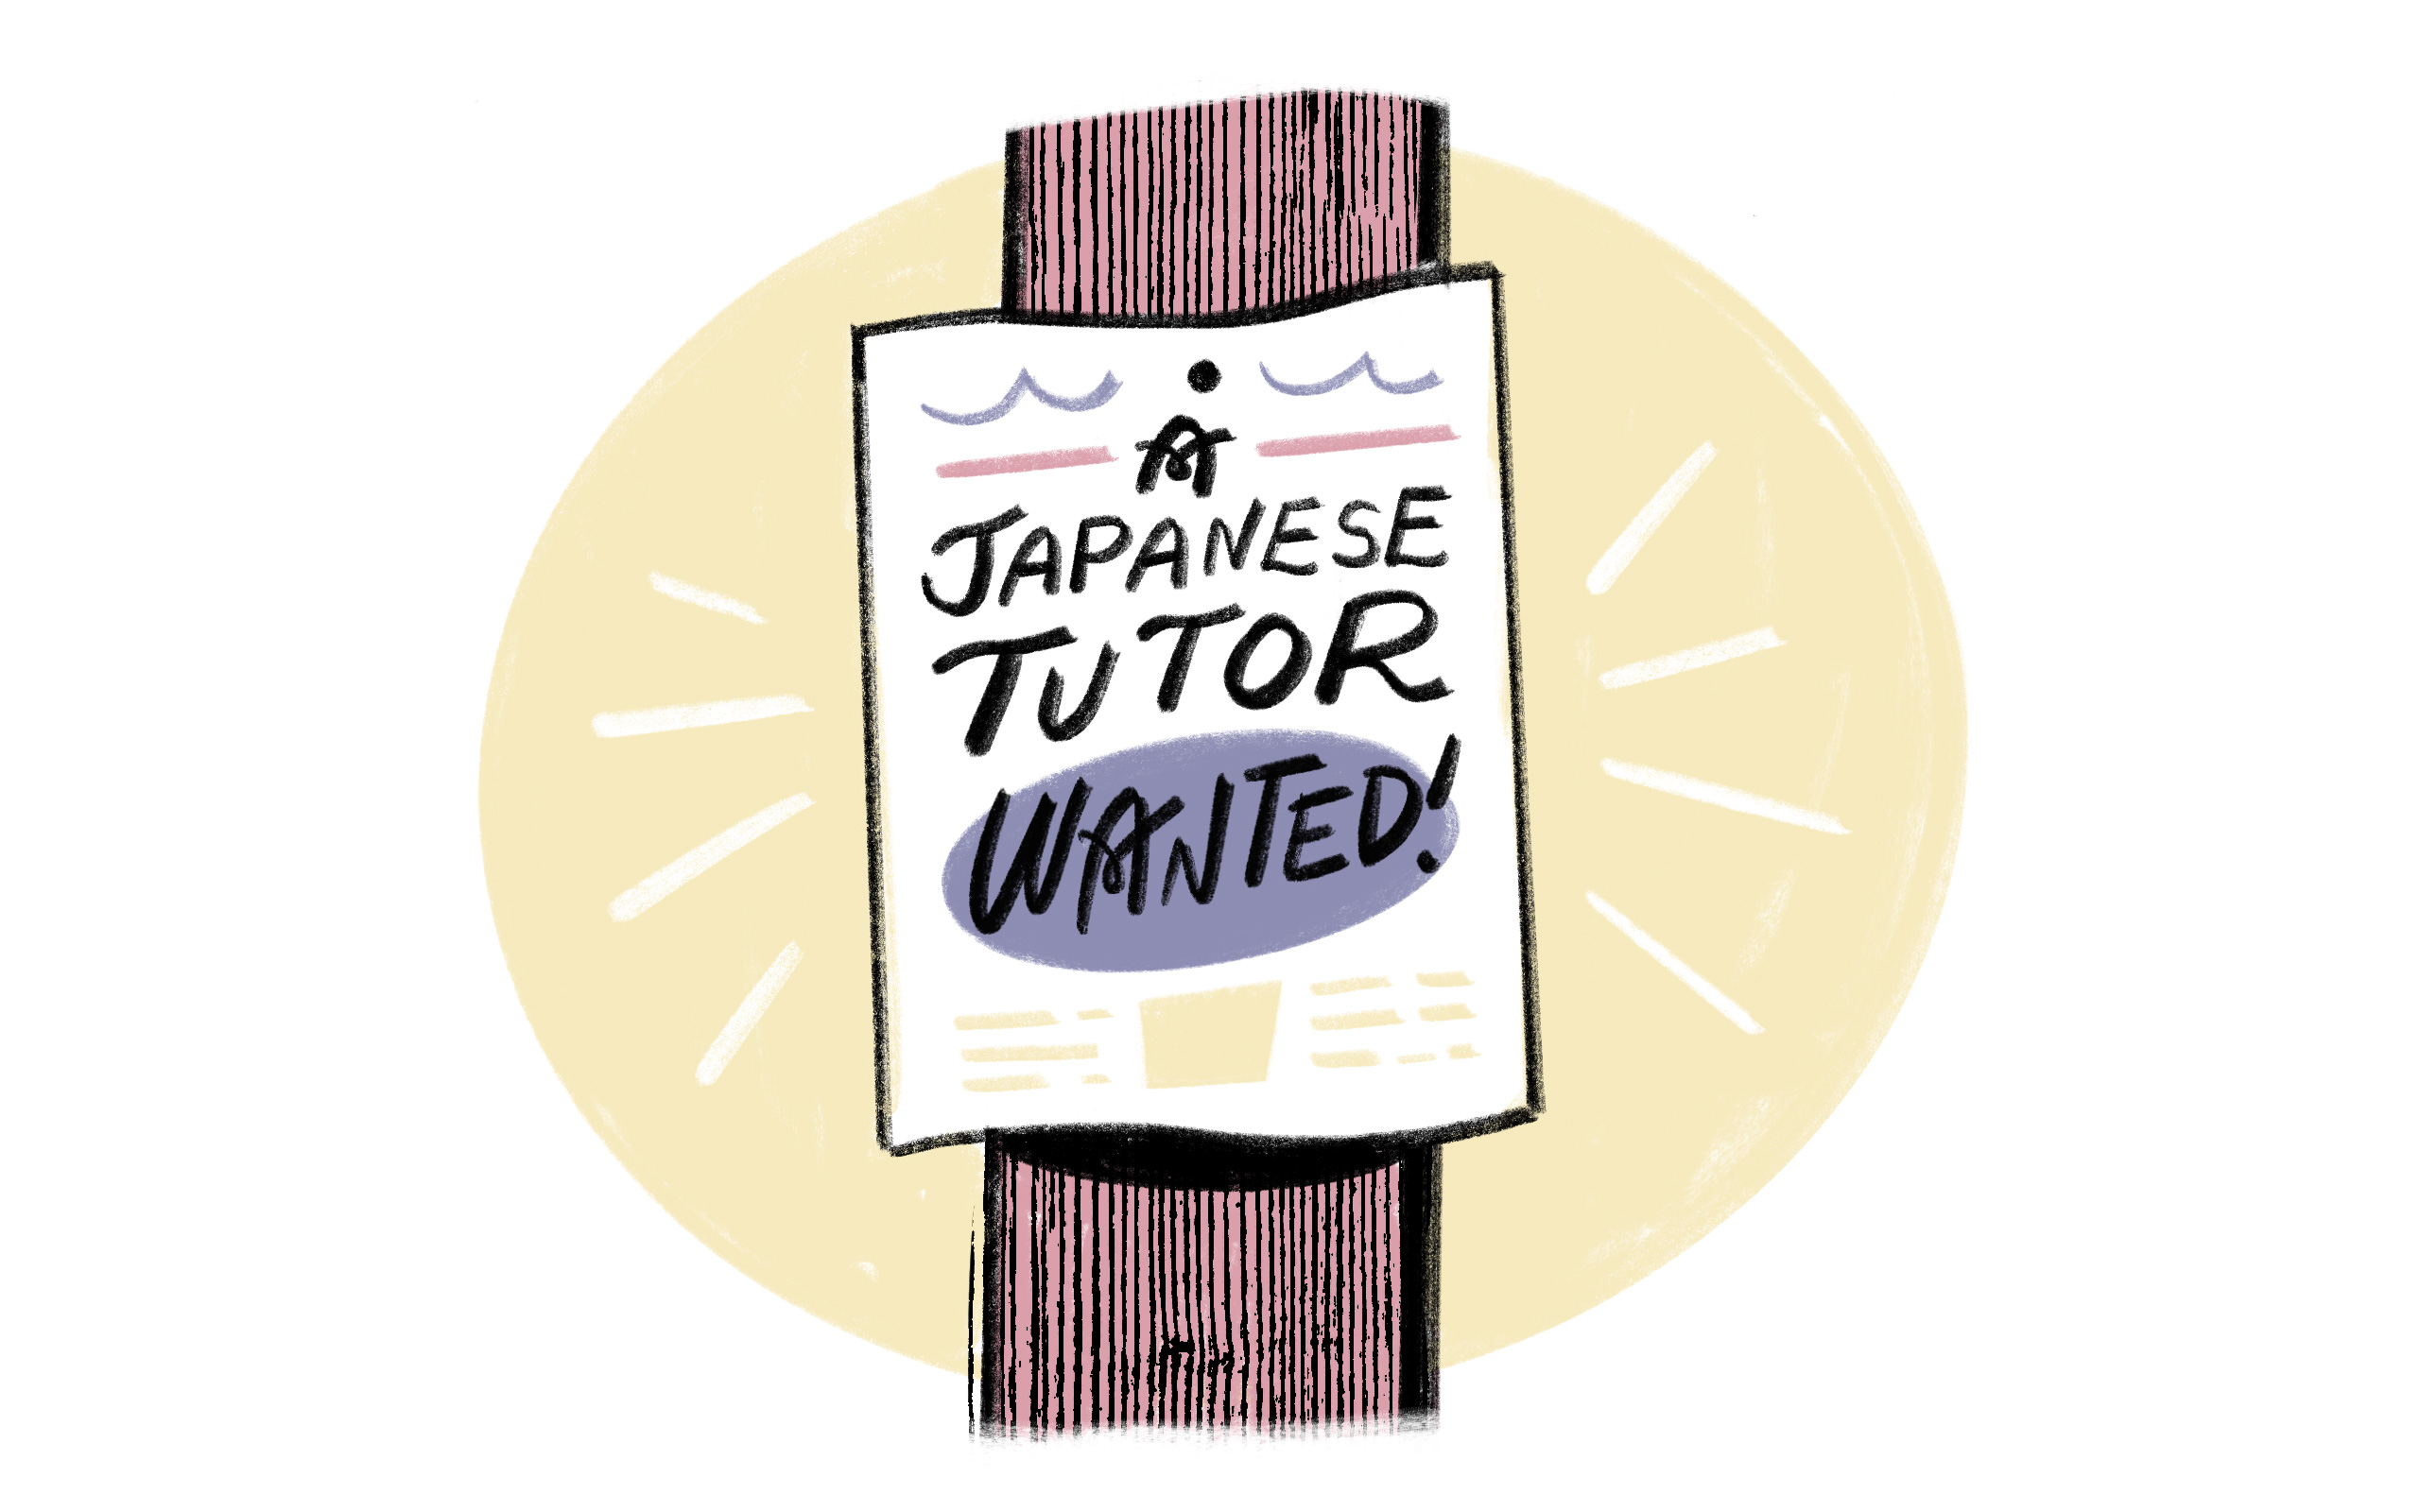 japanese tutor wanted sign